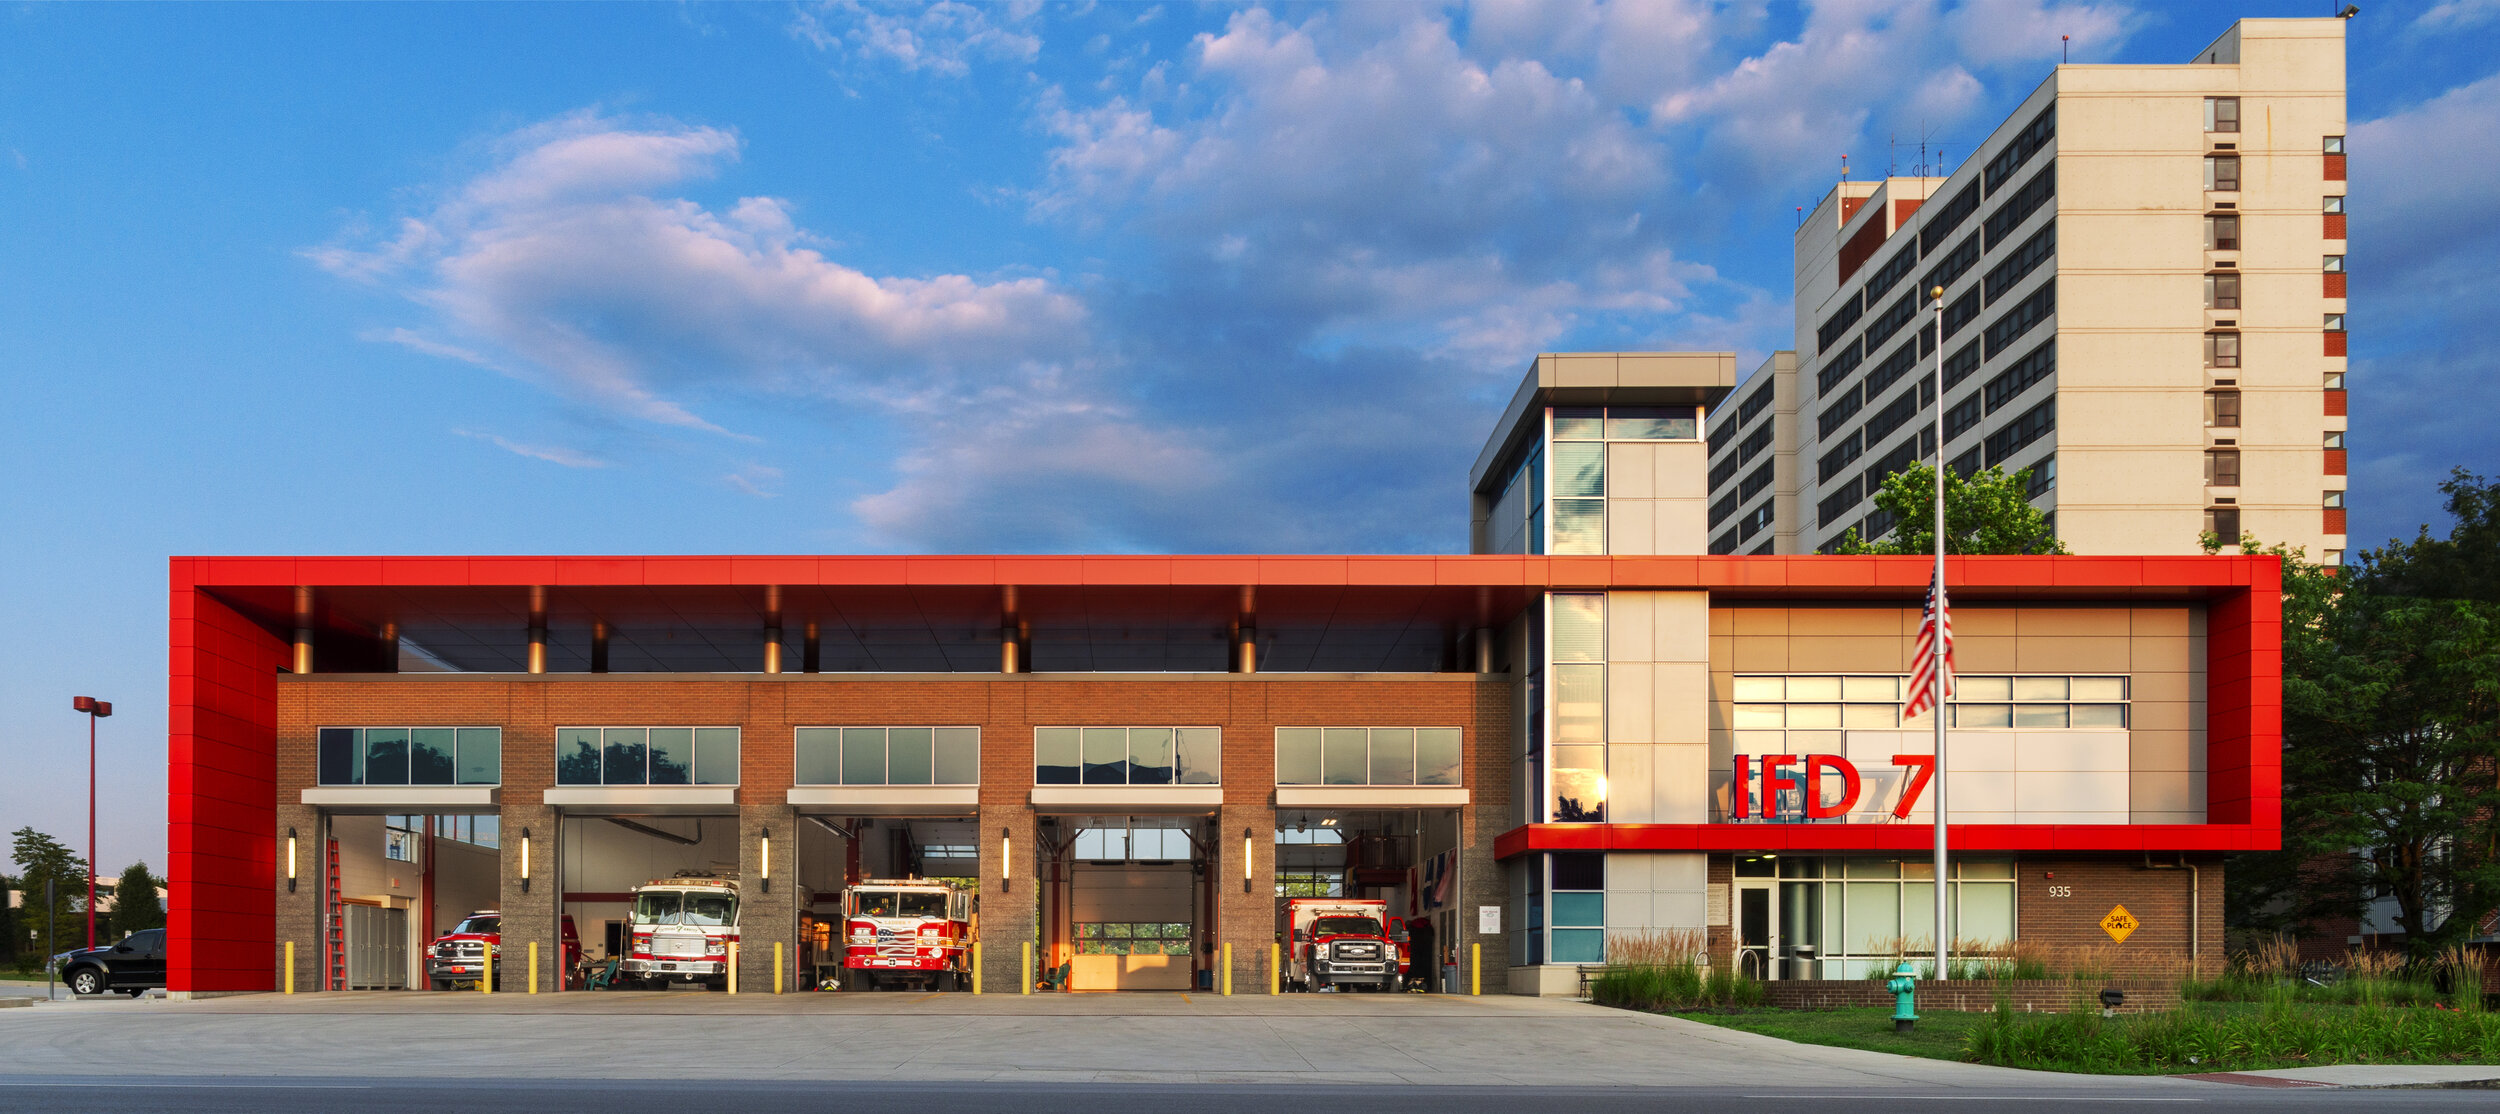 An architectural photography showing a building with several fire trucks.